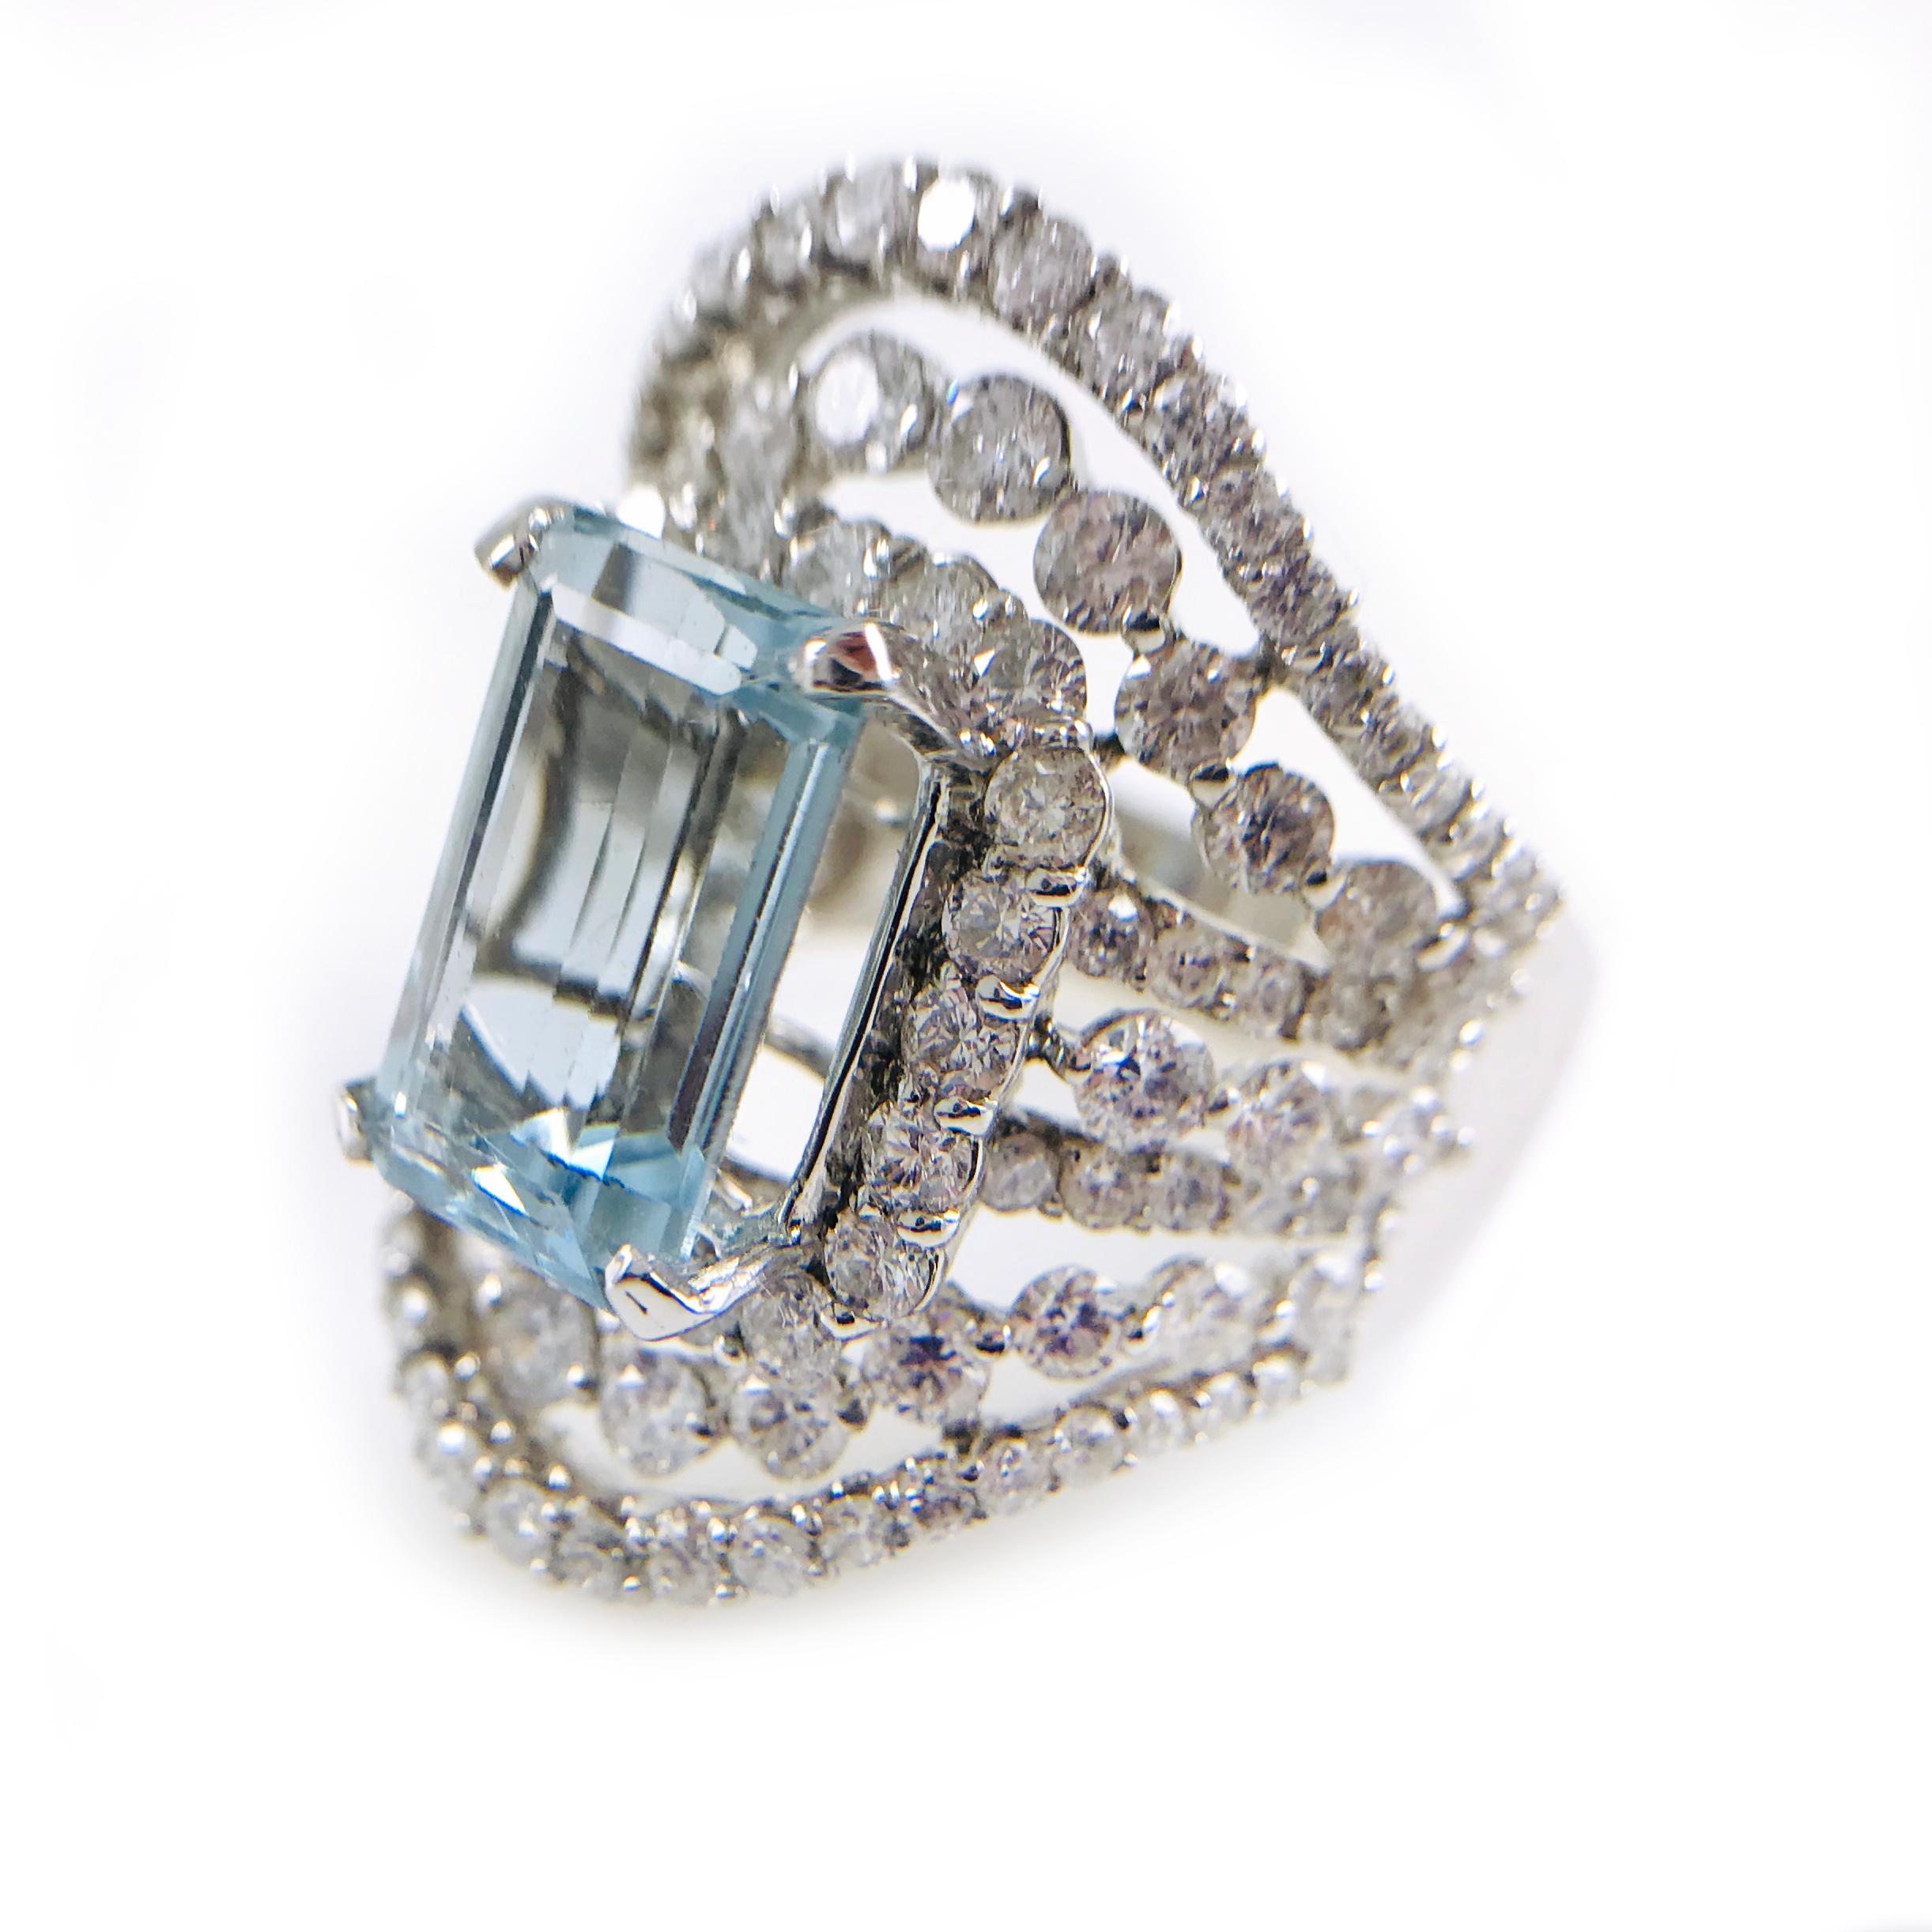 18 Karat Gold Cigar-shaped band with a Step-Cut Aquamarine prong-set in the center. The Aquamarine measures 13.2 x 7.5 x 5.2mm and has a carat weight is 6.5 ct. Multiple rows of round prong-set diamonds surround the center gemstone. The diamonds are